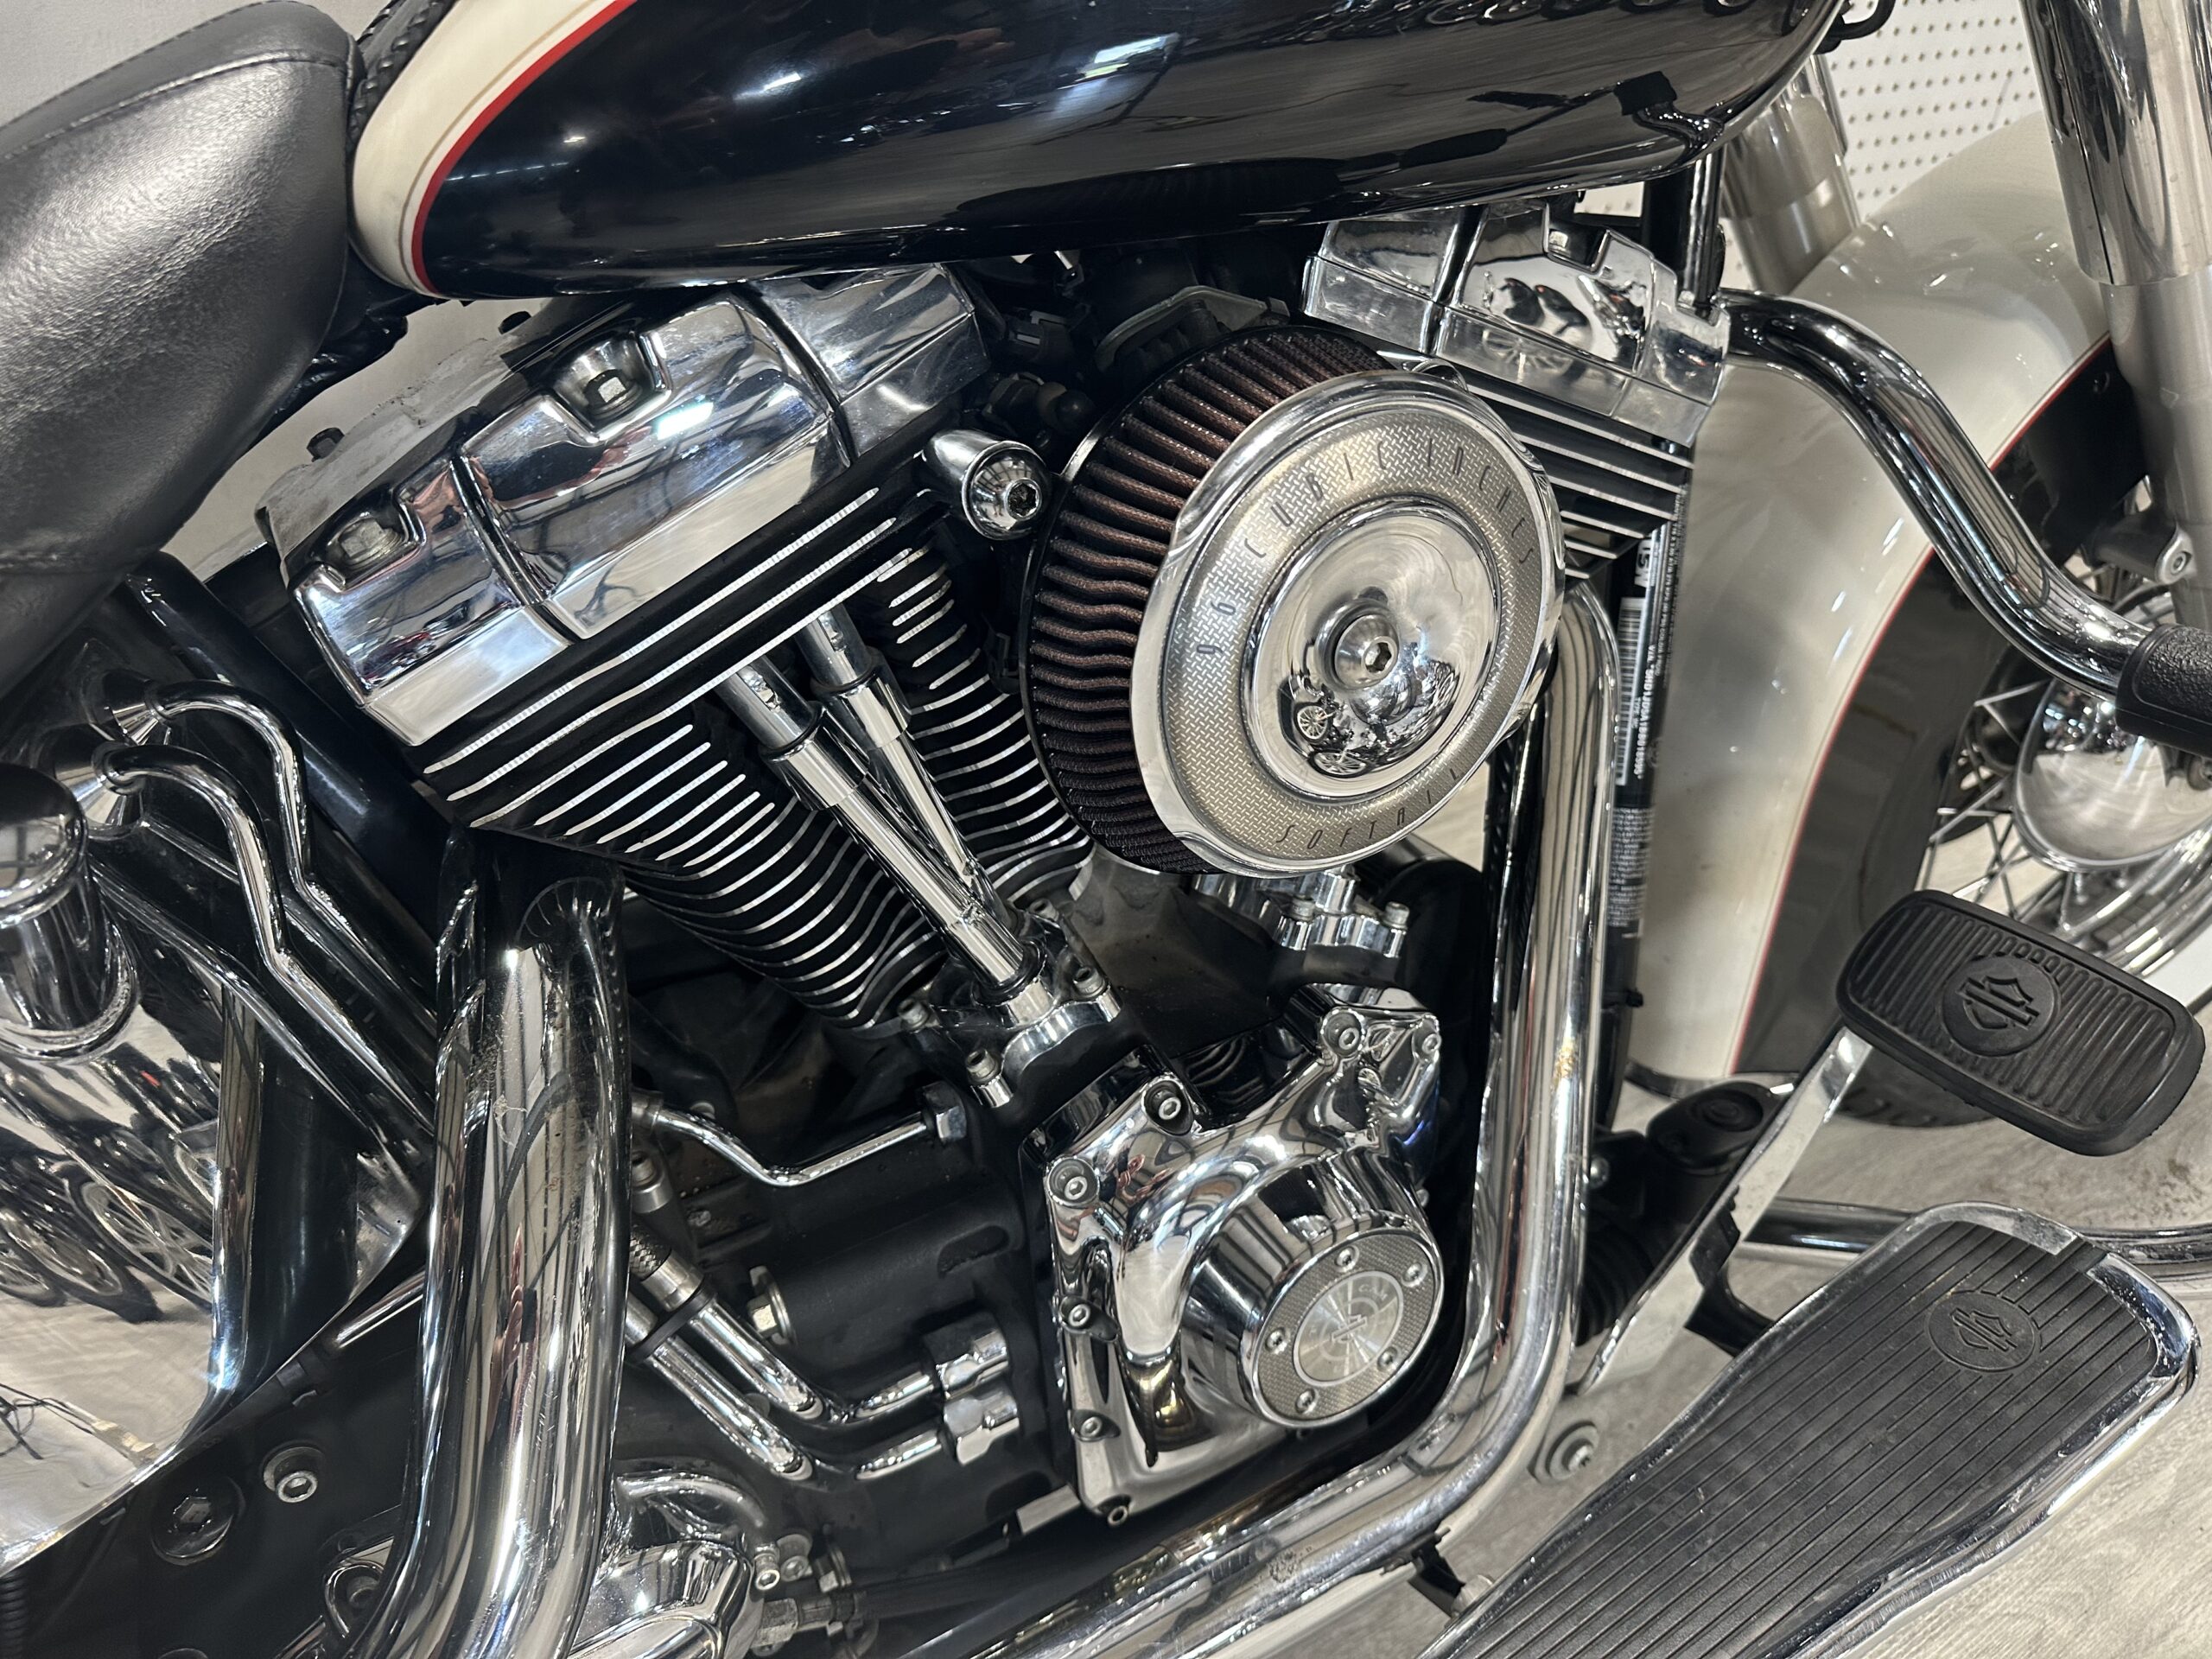 Harley-Davidson Softail Deluxe For sale ontario